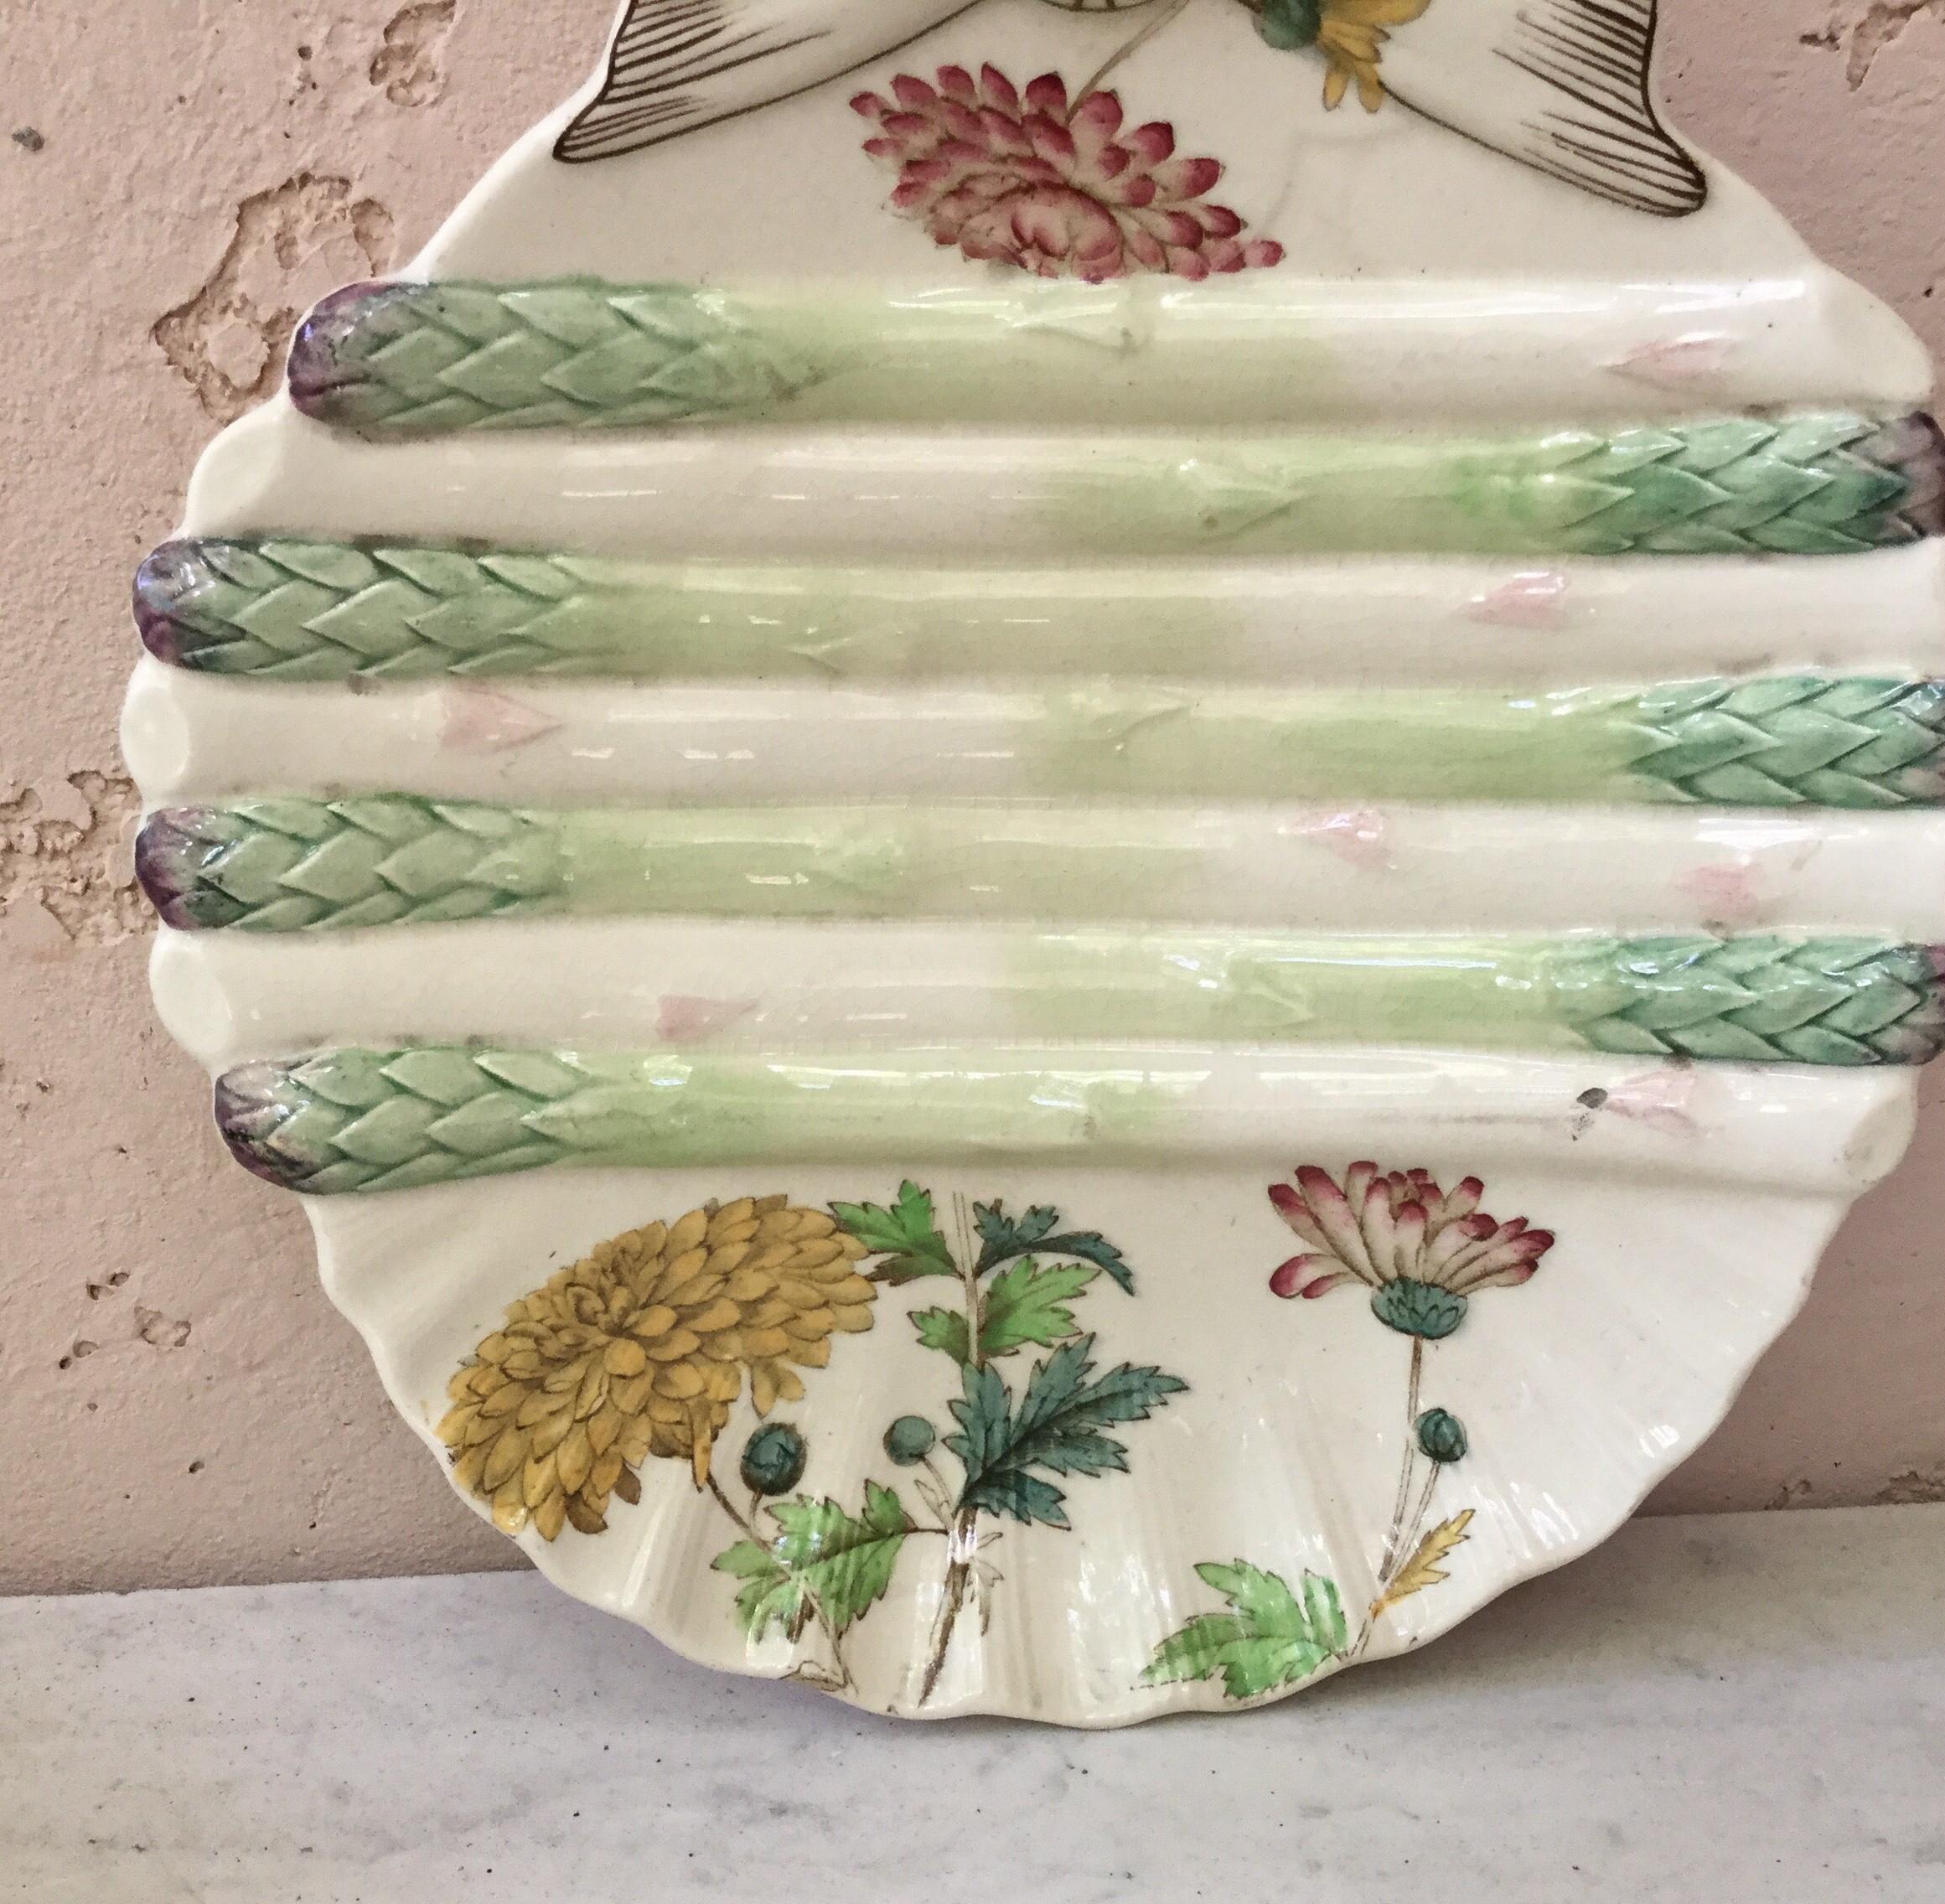 19th century English Majolica shell-shaped asparagus plate decorated with mums flowers 